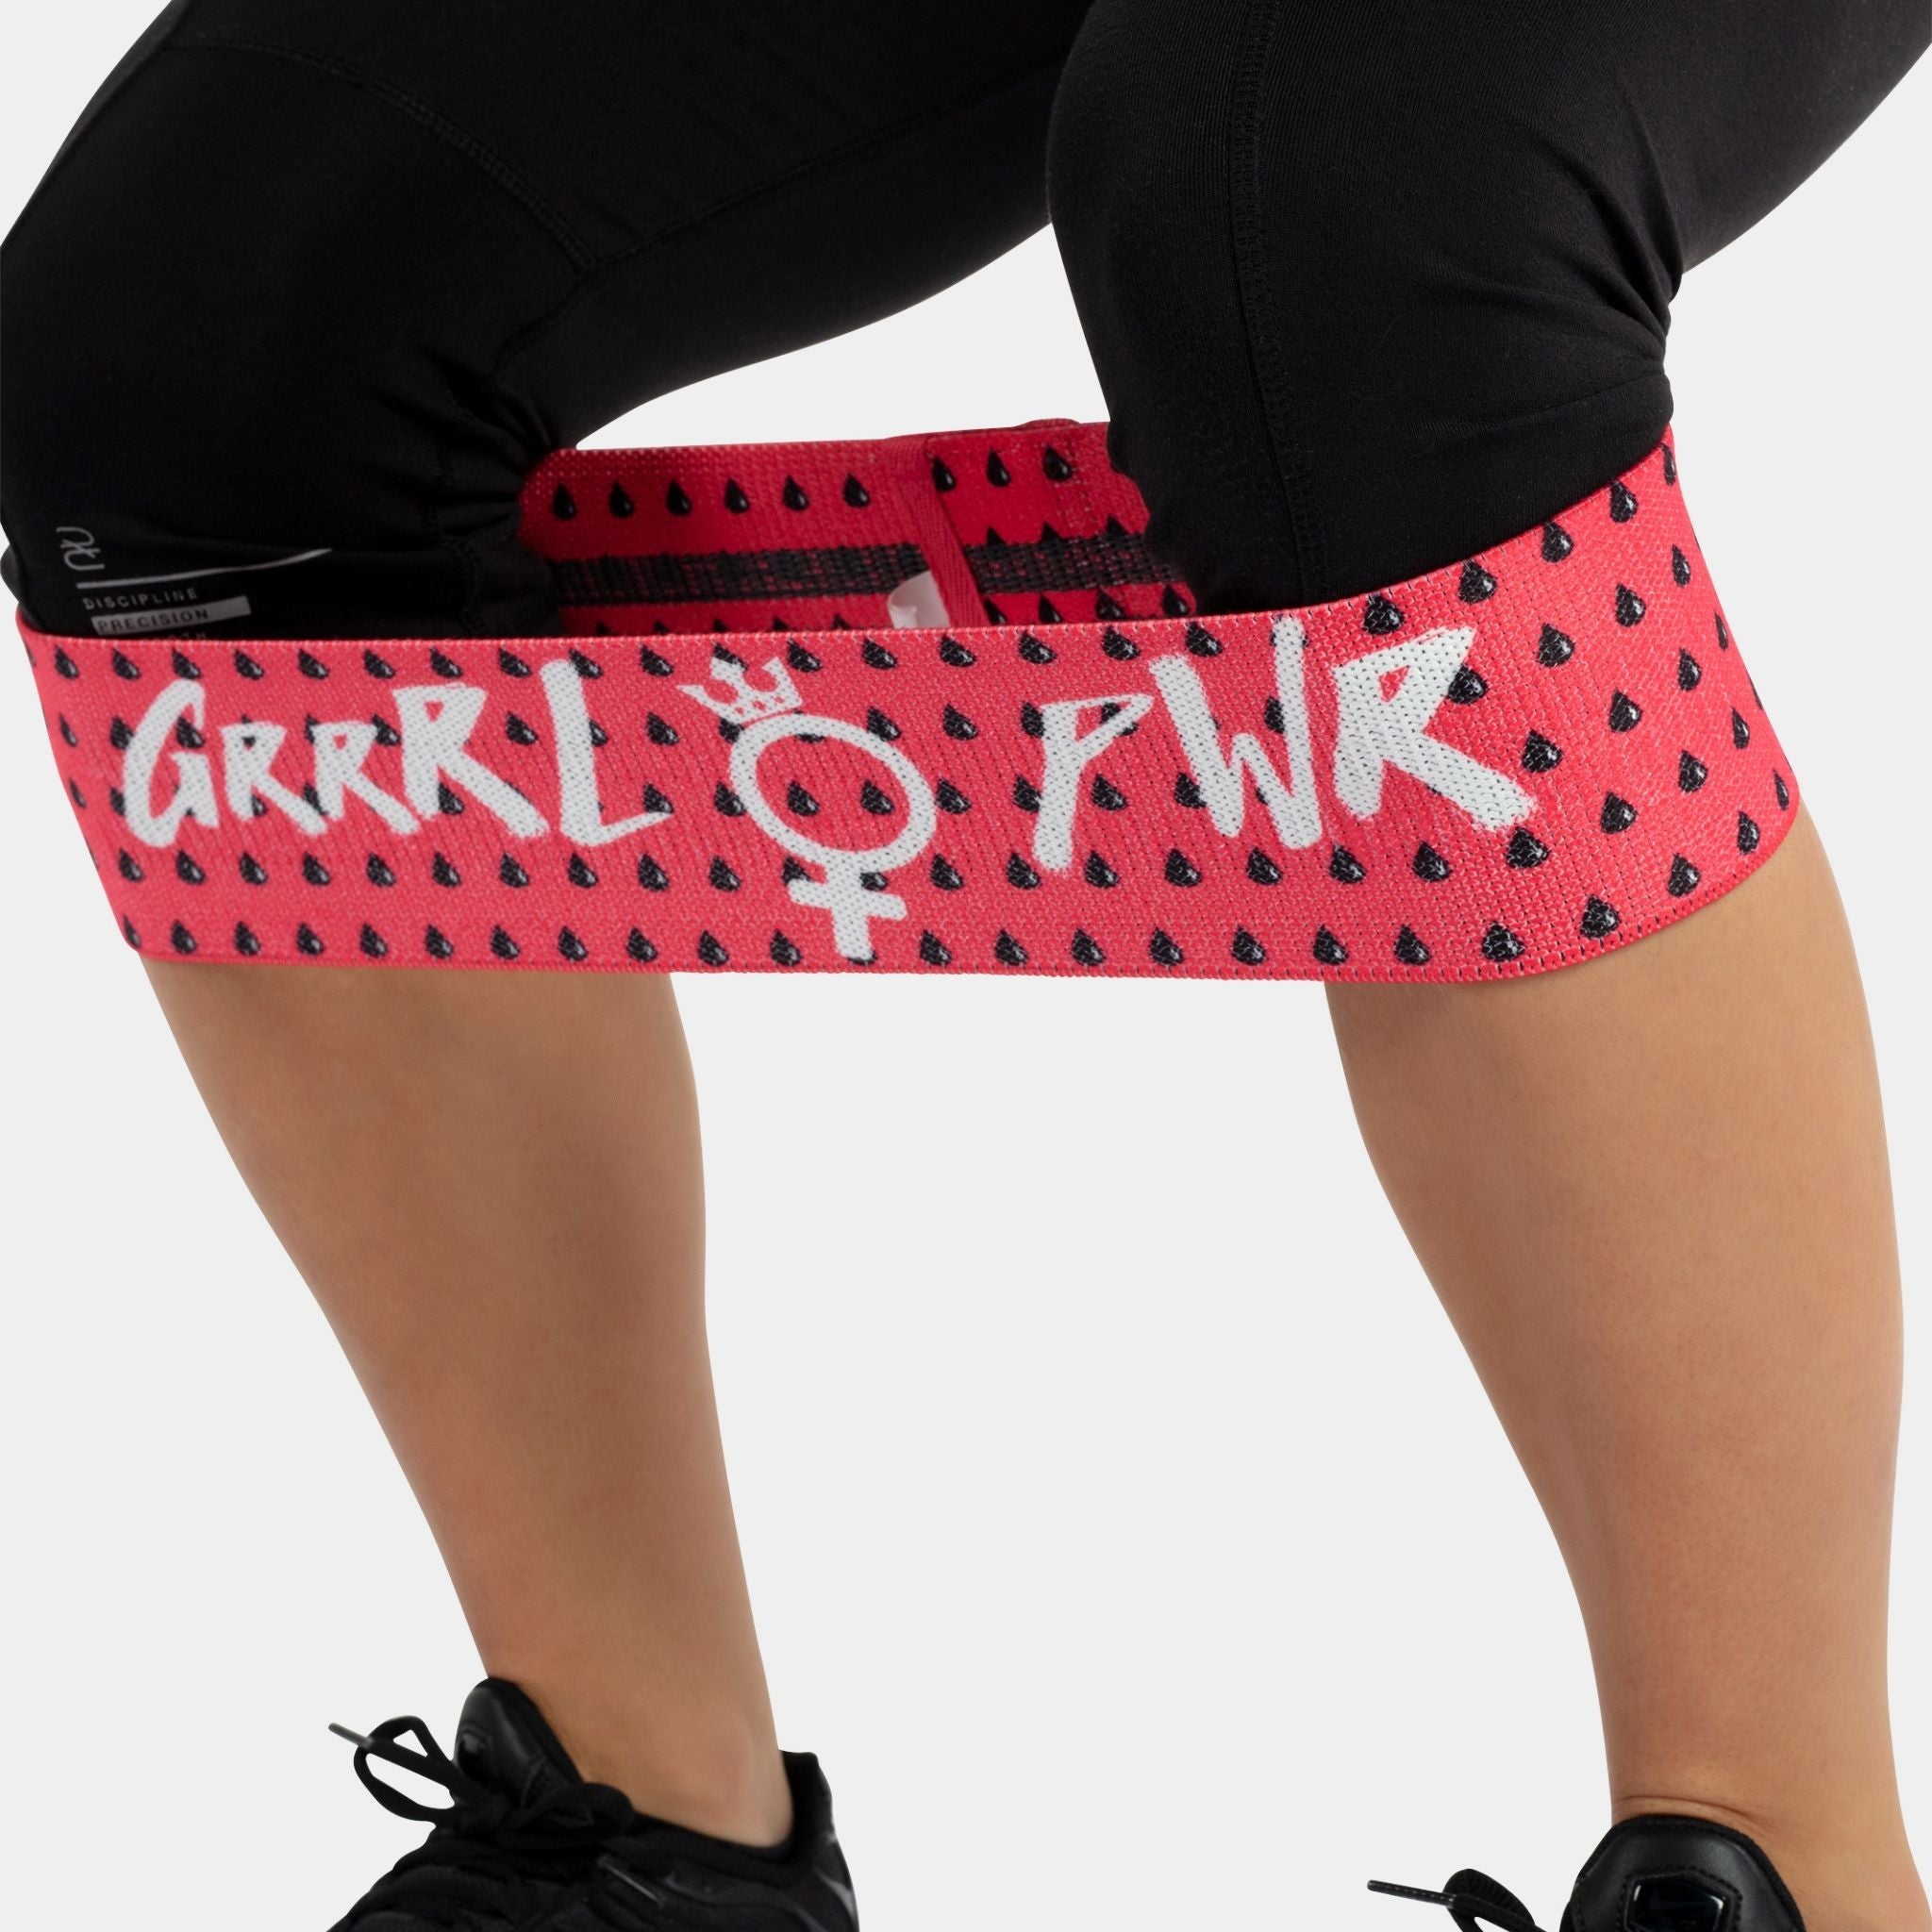 GRL PWR Glutes Activation Band from Genejack for Genejack WOD